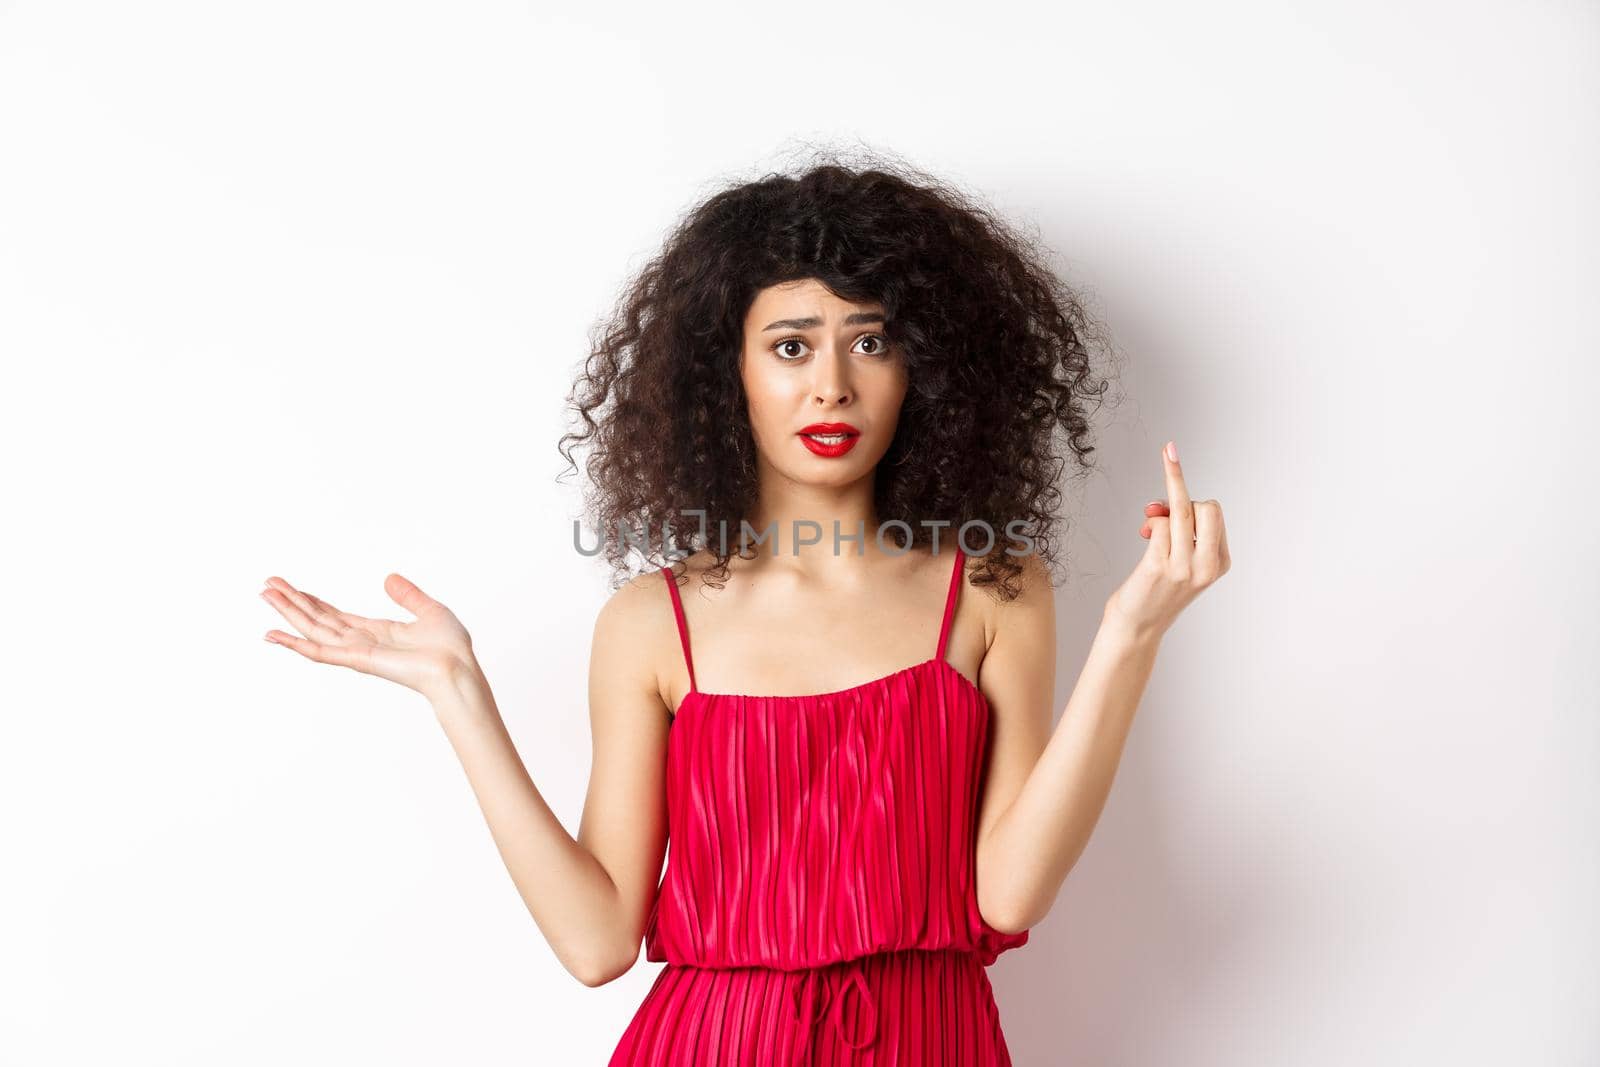 Annoyed caucasian woman in red dress, showing finger without wedding ring, arguing about marriage, standing pissed-off on white background.